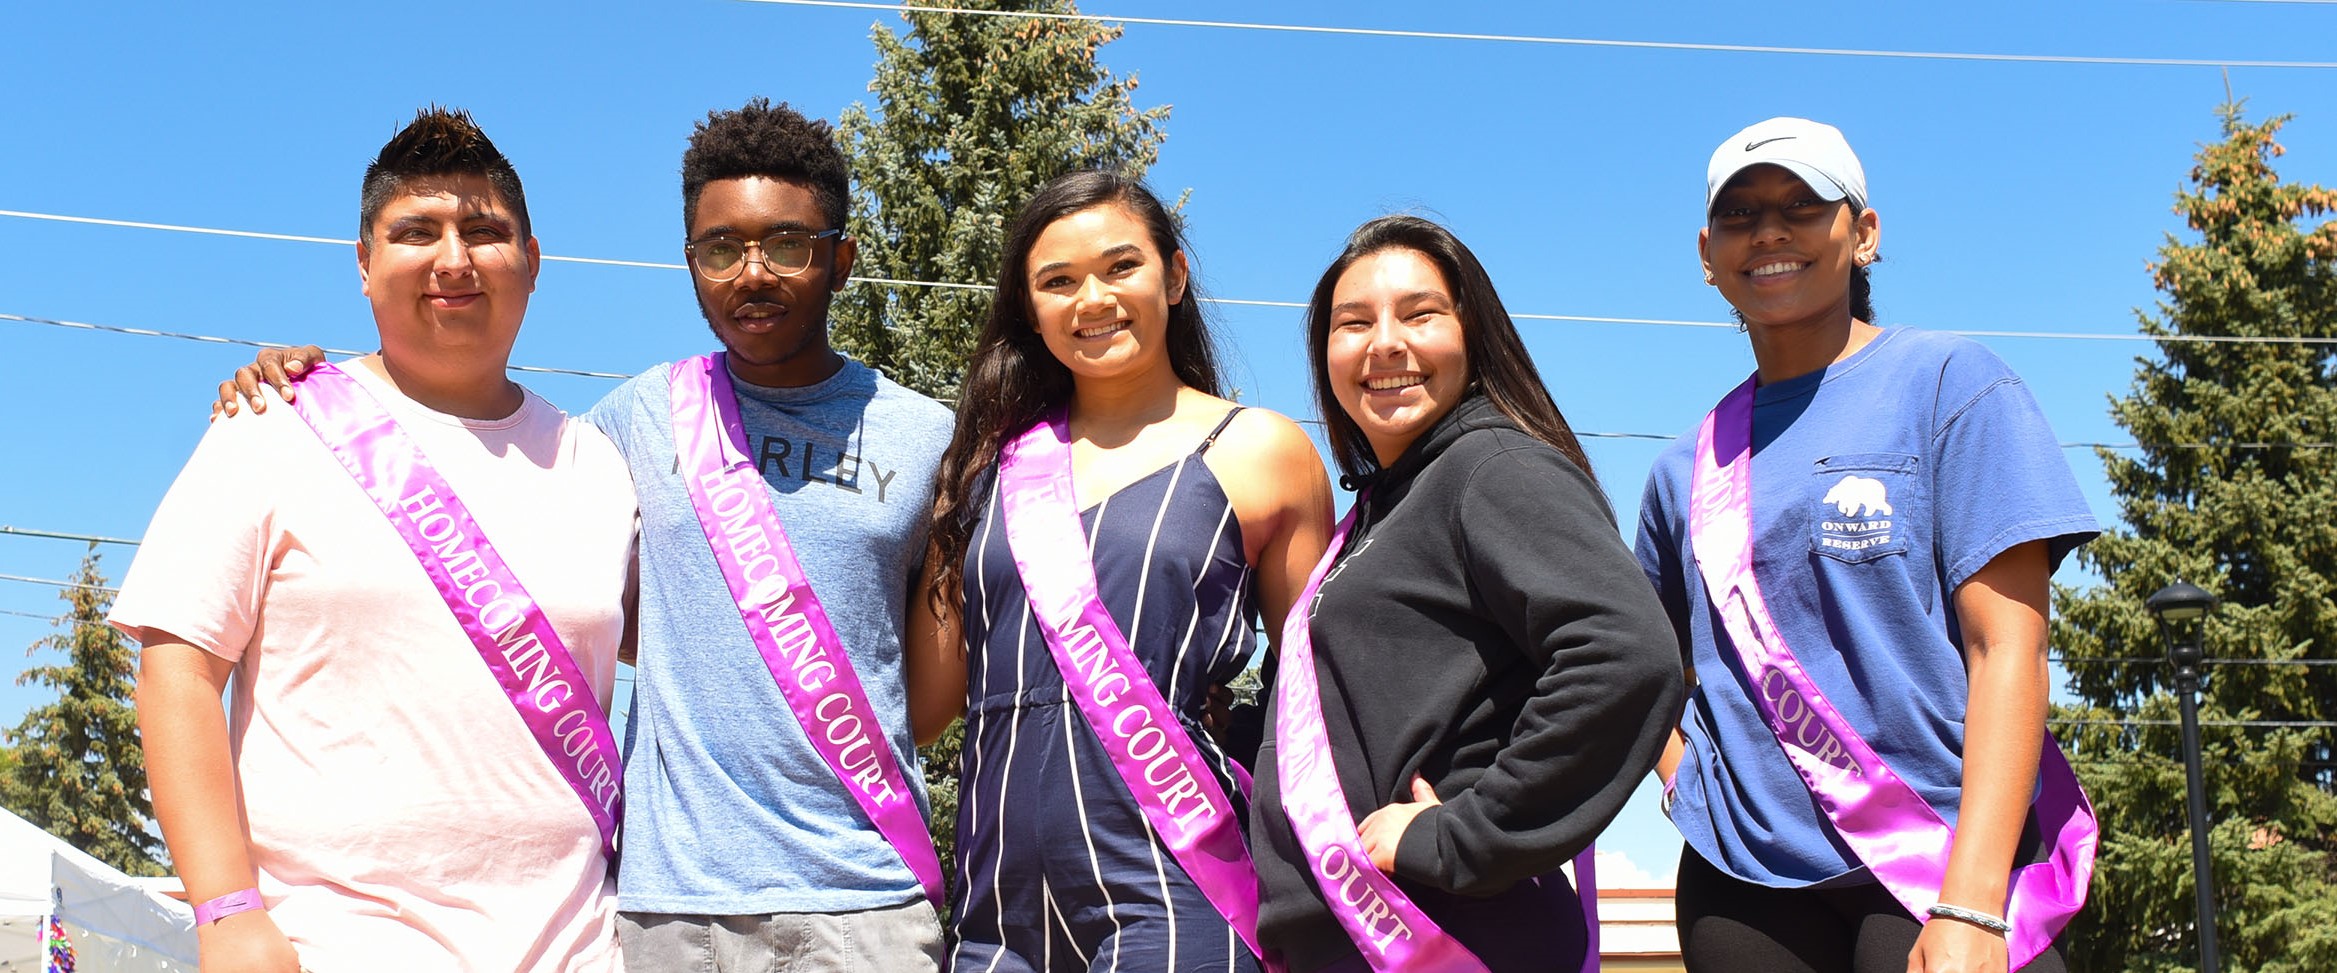 Photo of homecoming student royalty candidates